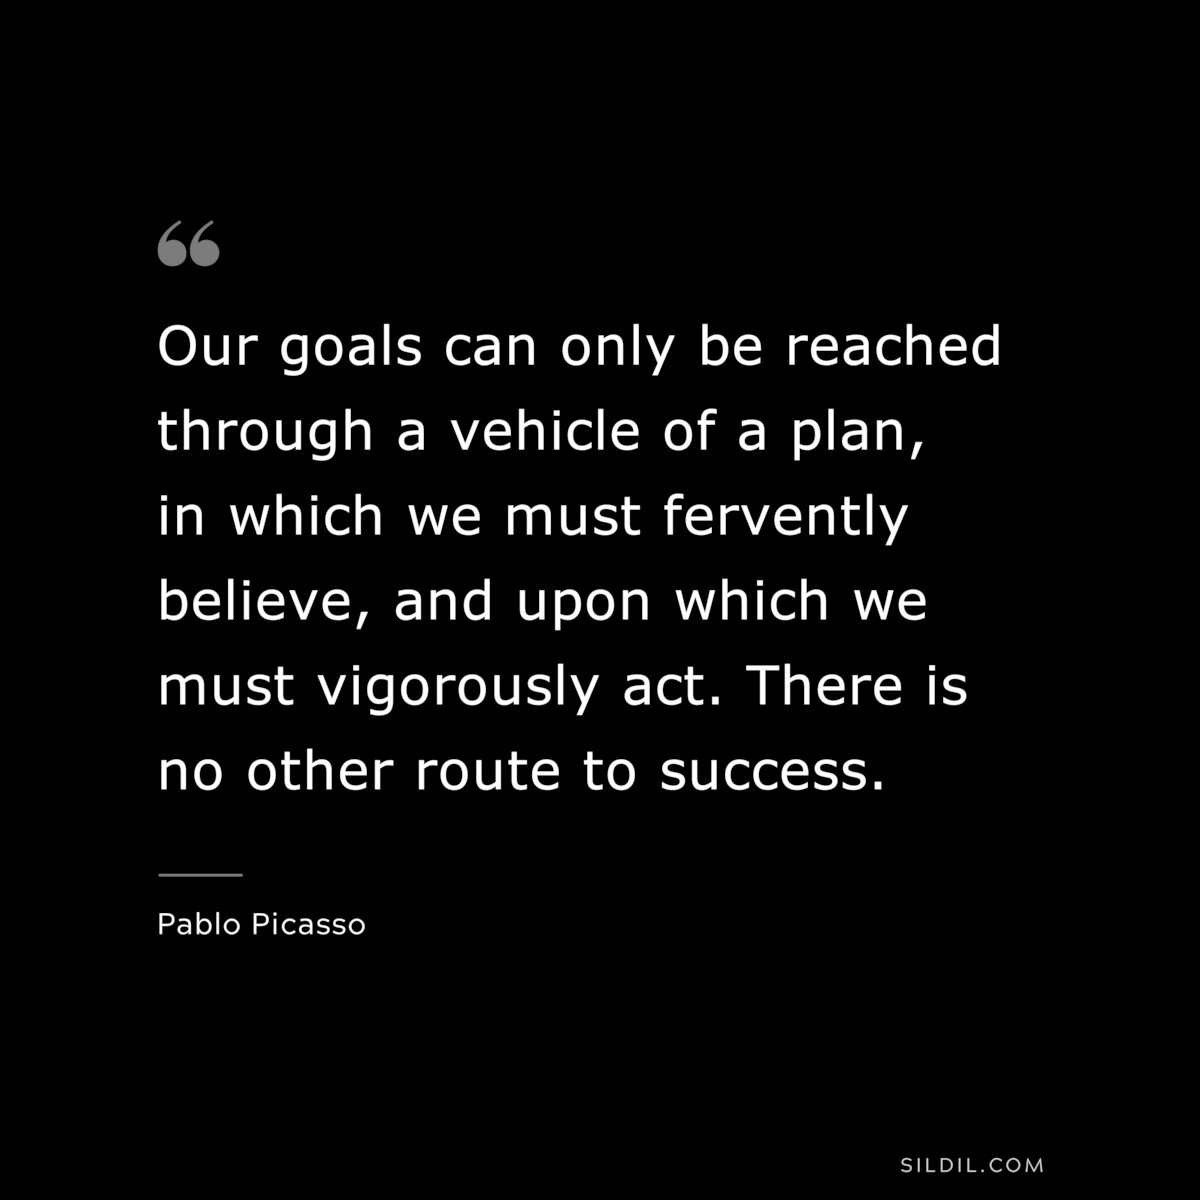 Our goals can only be reached through a vehicle of a plan, in which we must fervently believe, and upon which we must vigorously act. There is no other route to success. ― Pablo Picasso